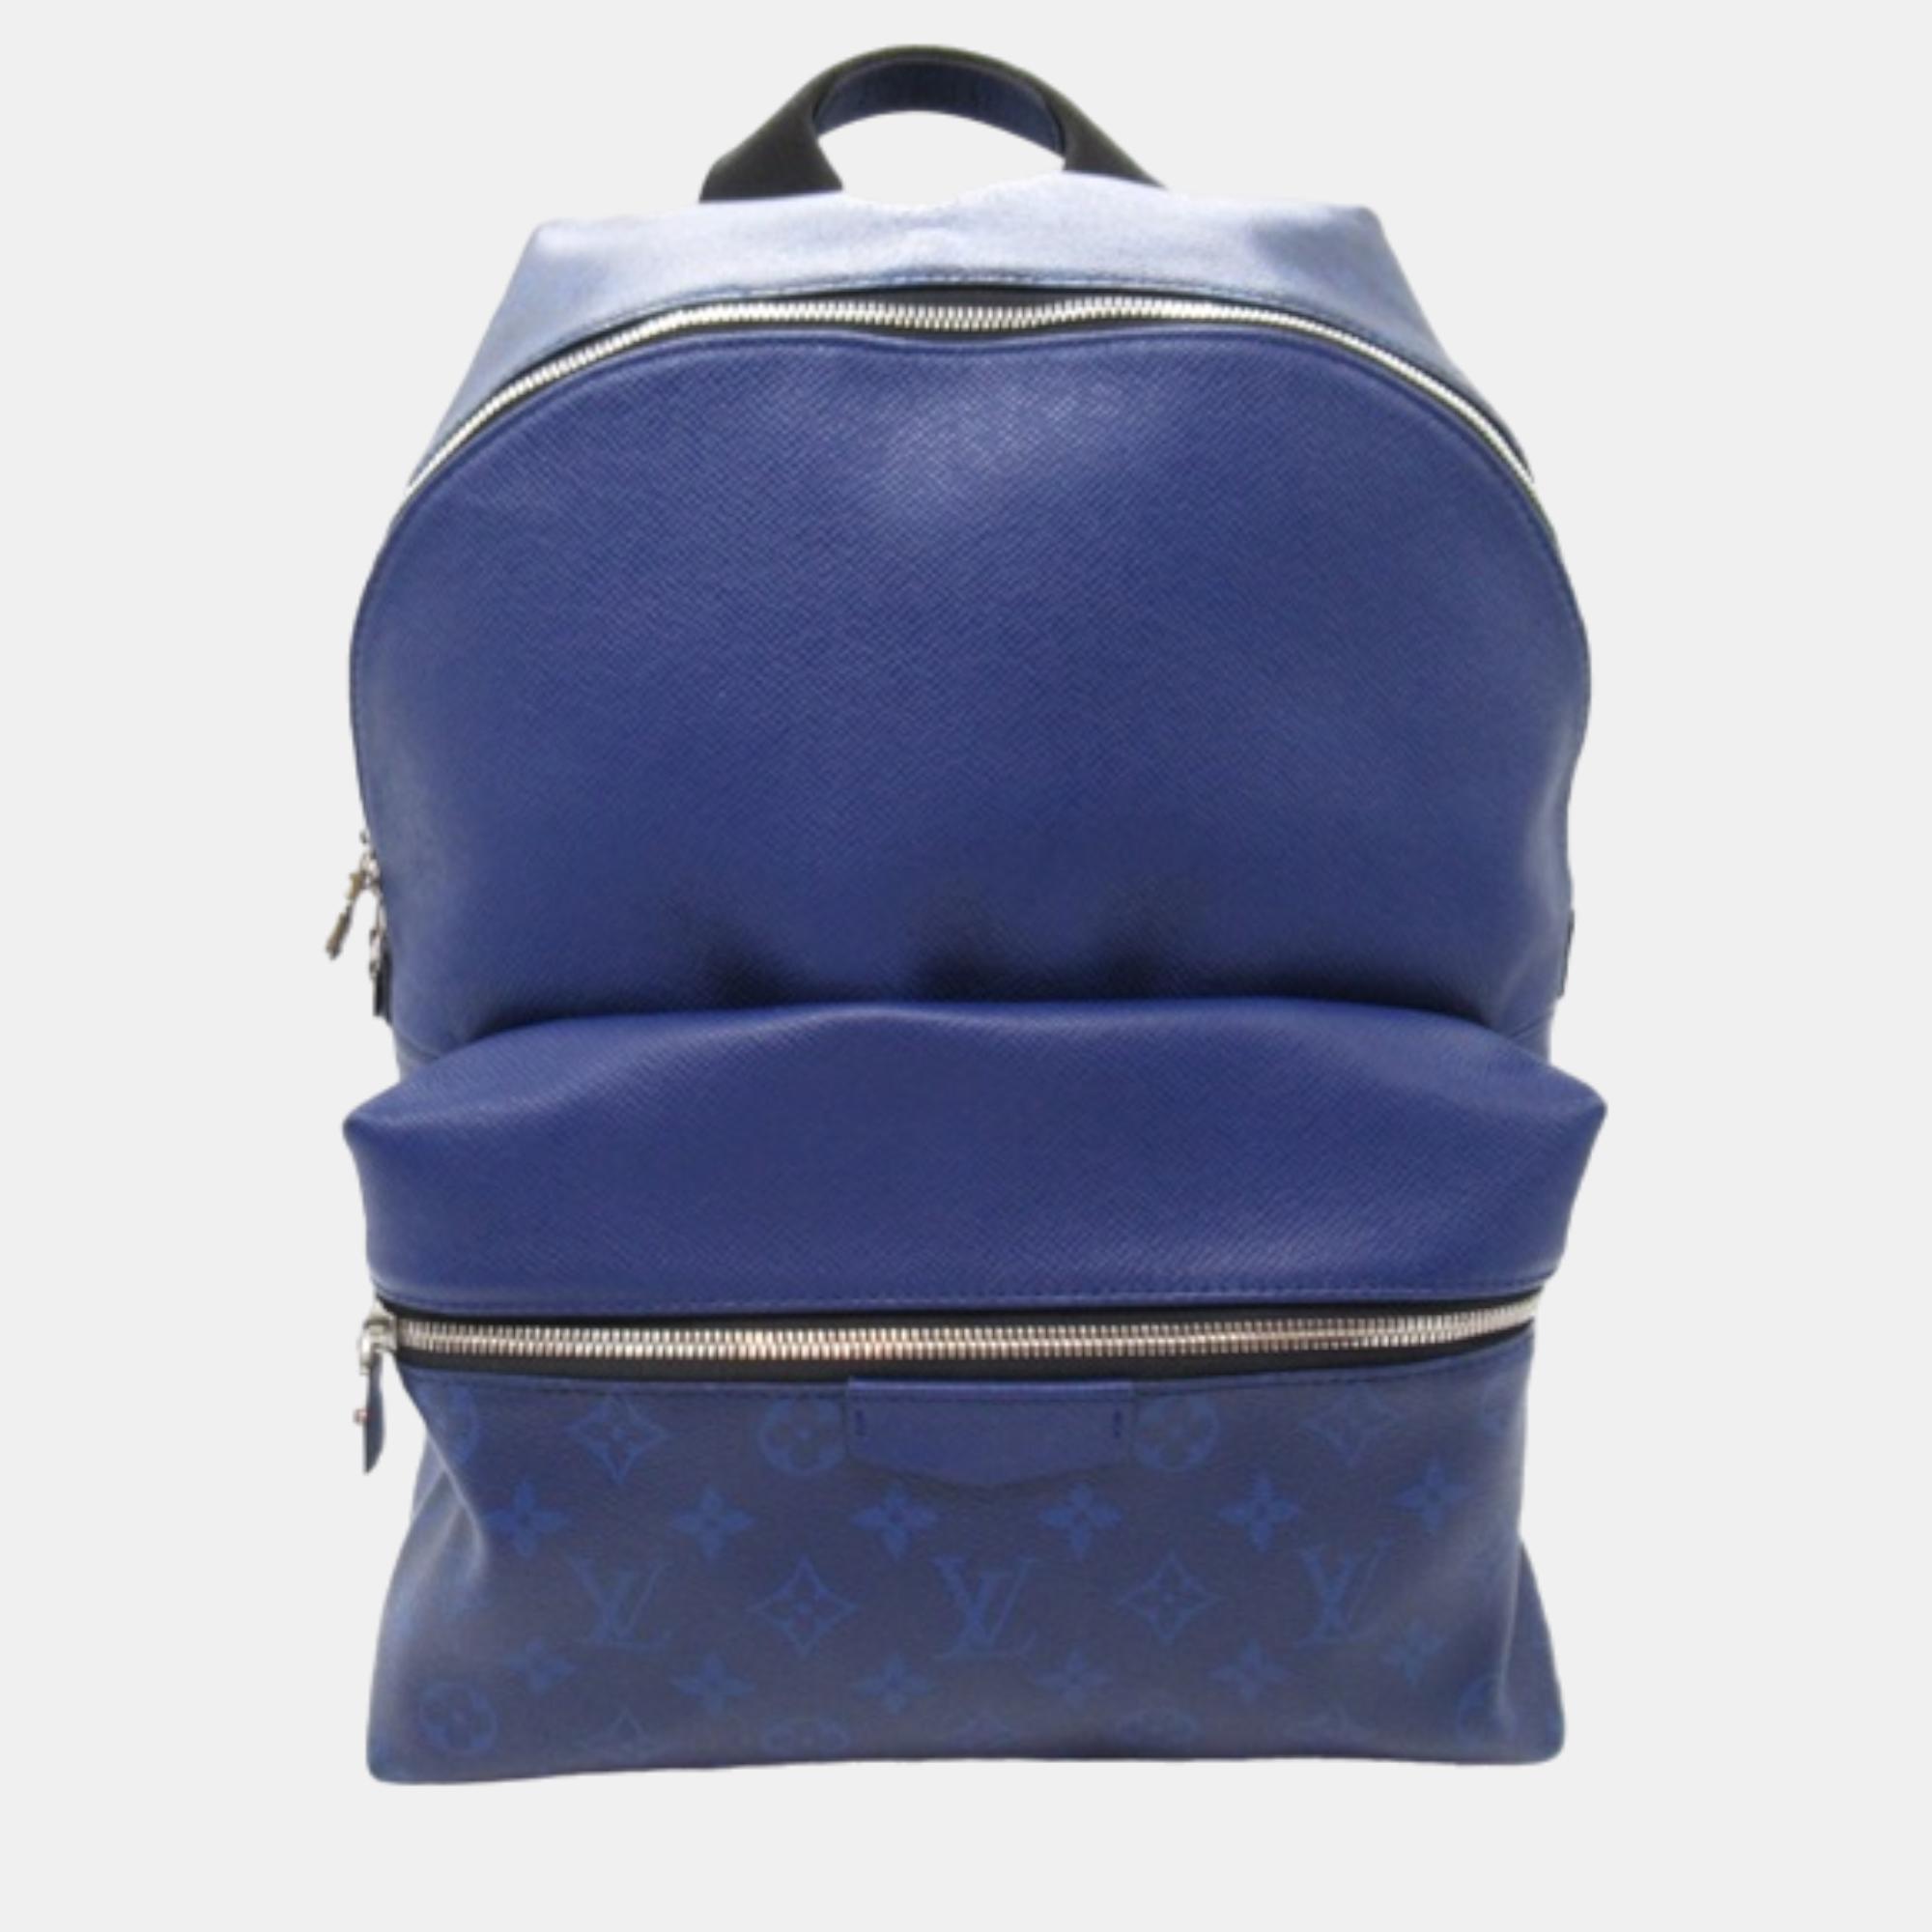 Louis vuitton blue leather taigarama discovery backpack